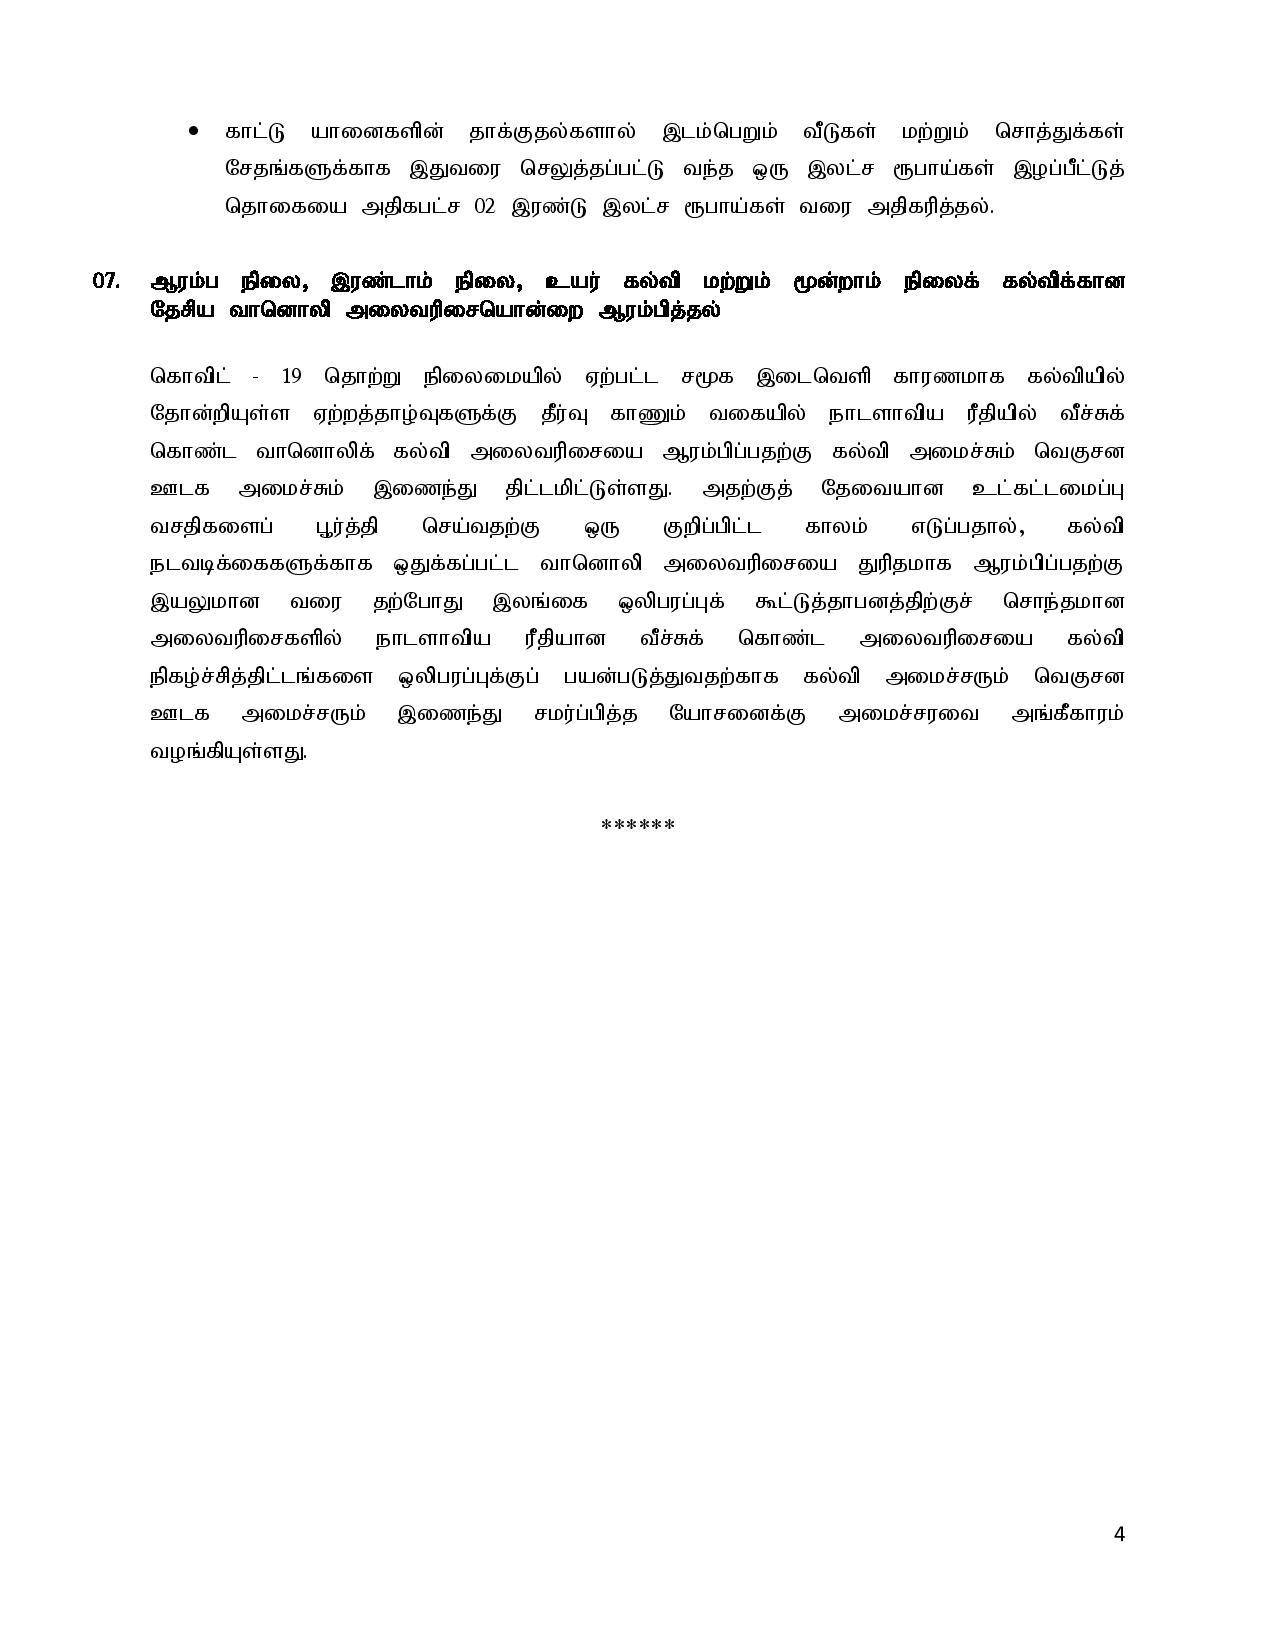 Cabinet Decisions on 02.08.2021 Tamil page 004